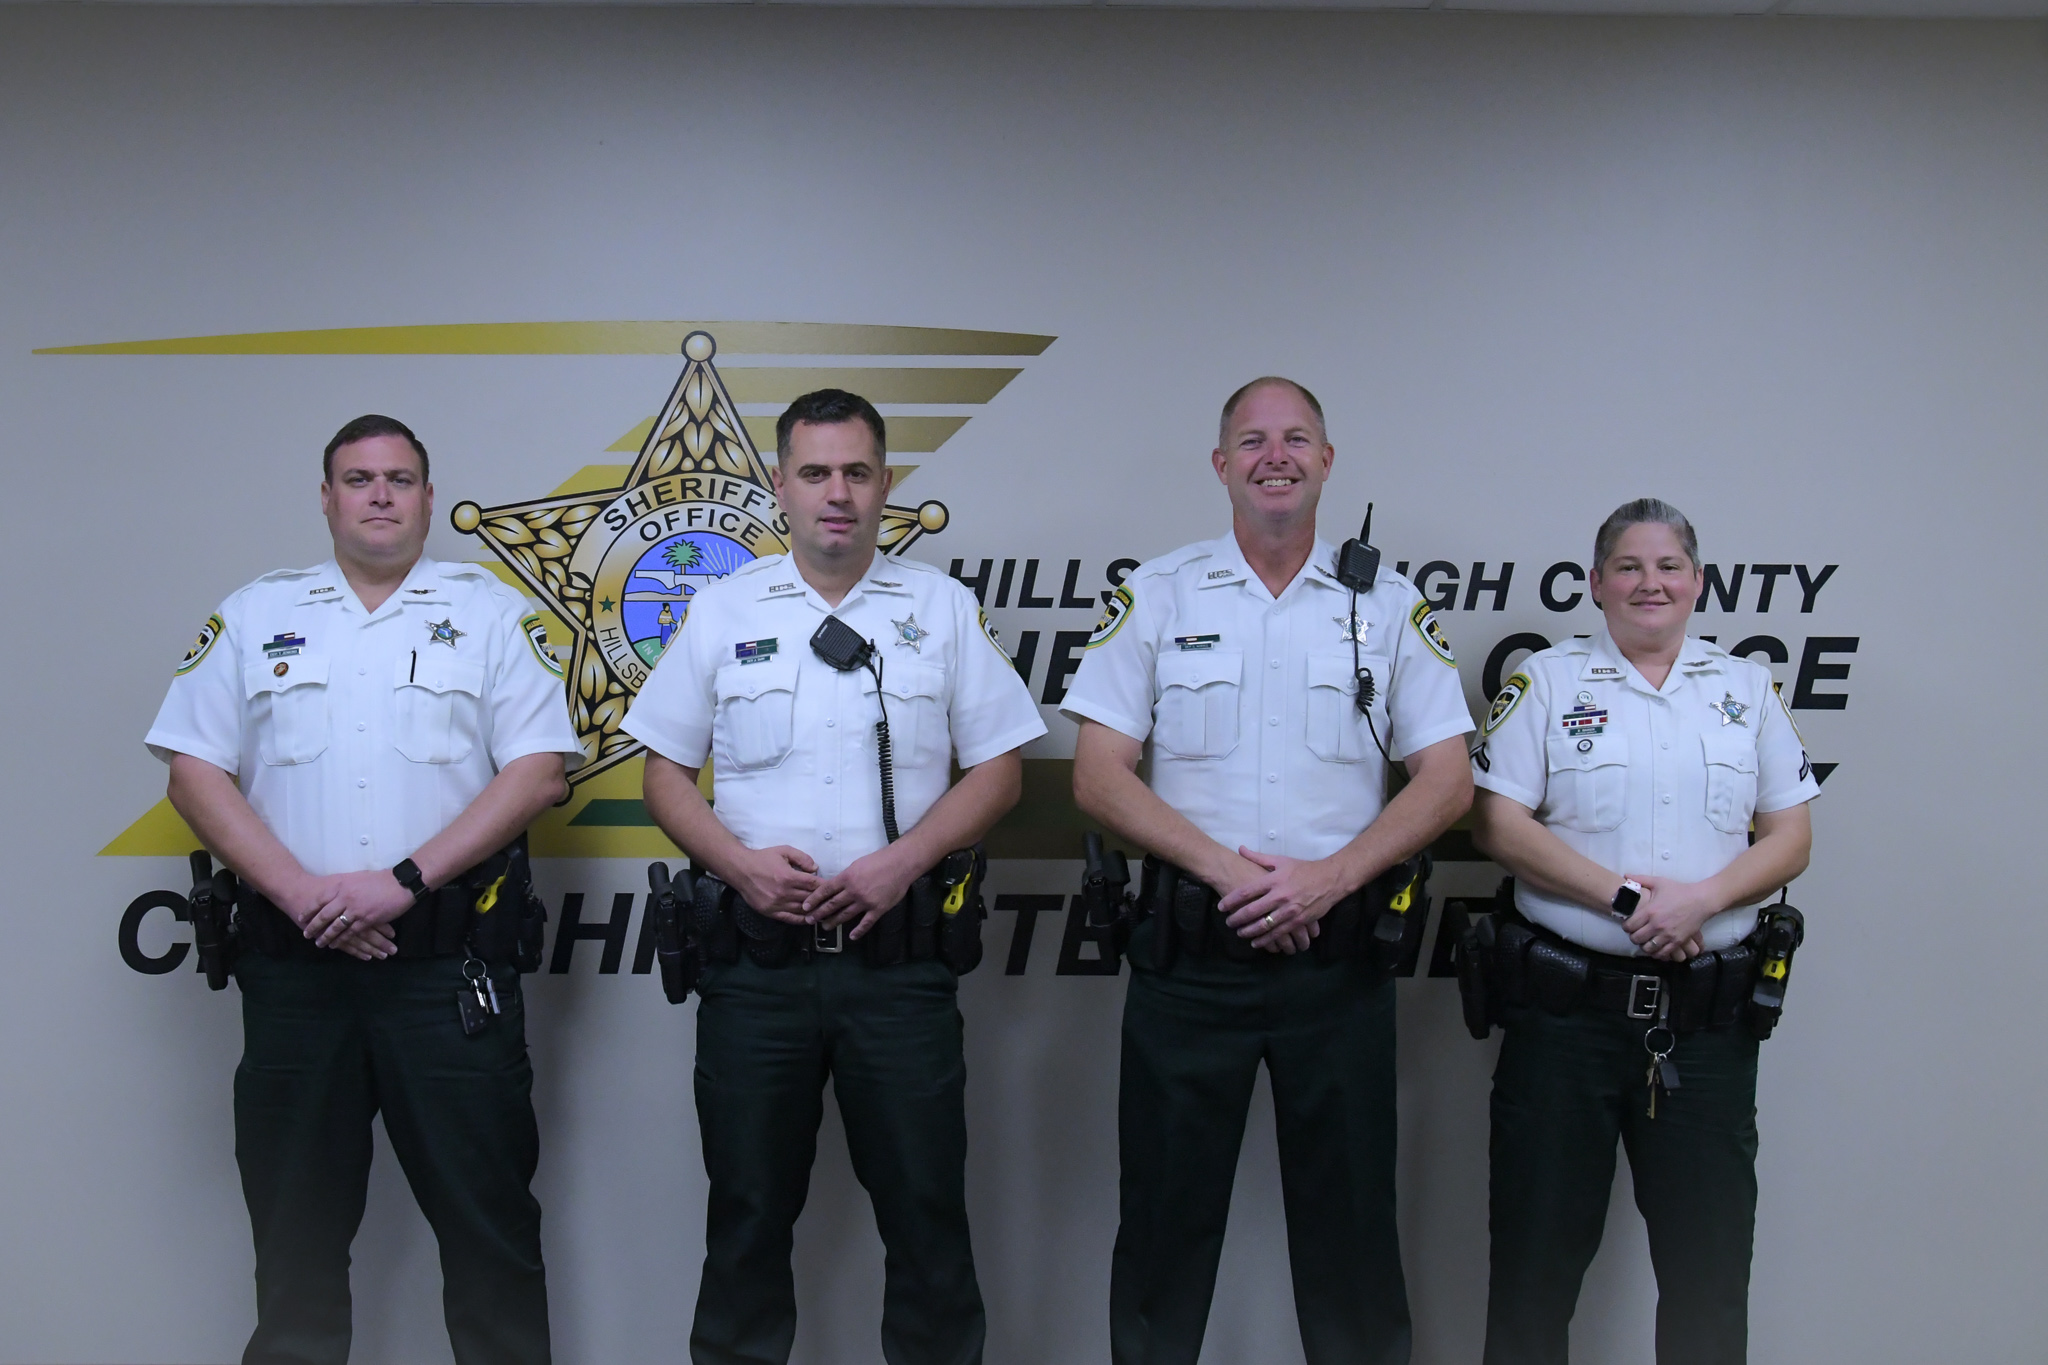 TeamHCSO forms new STAR squad to investigate school-based threats